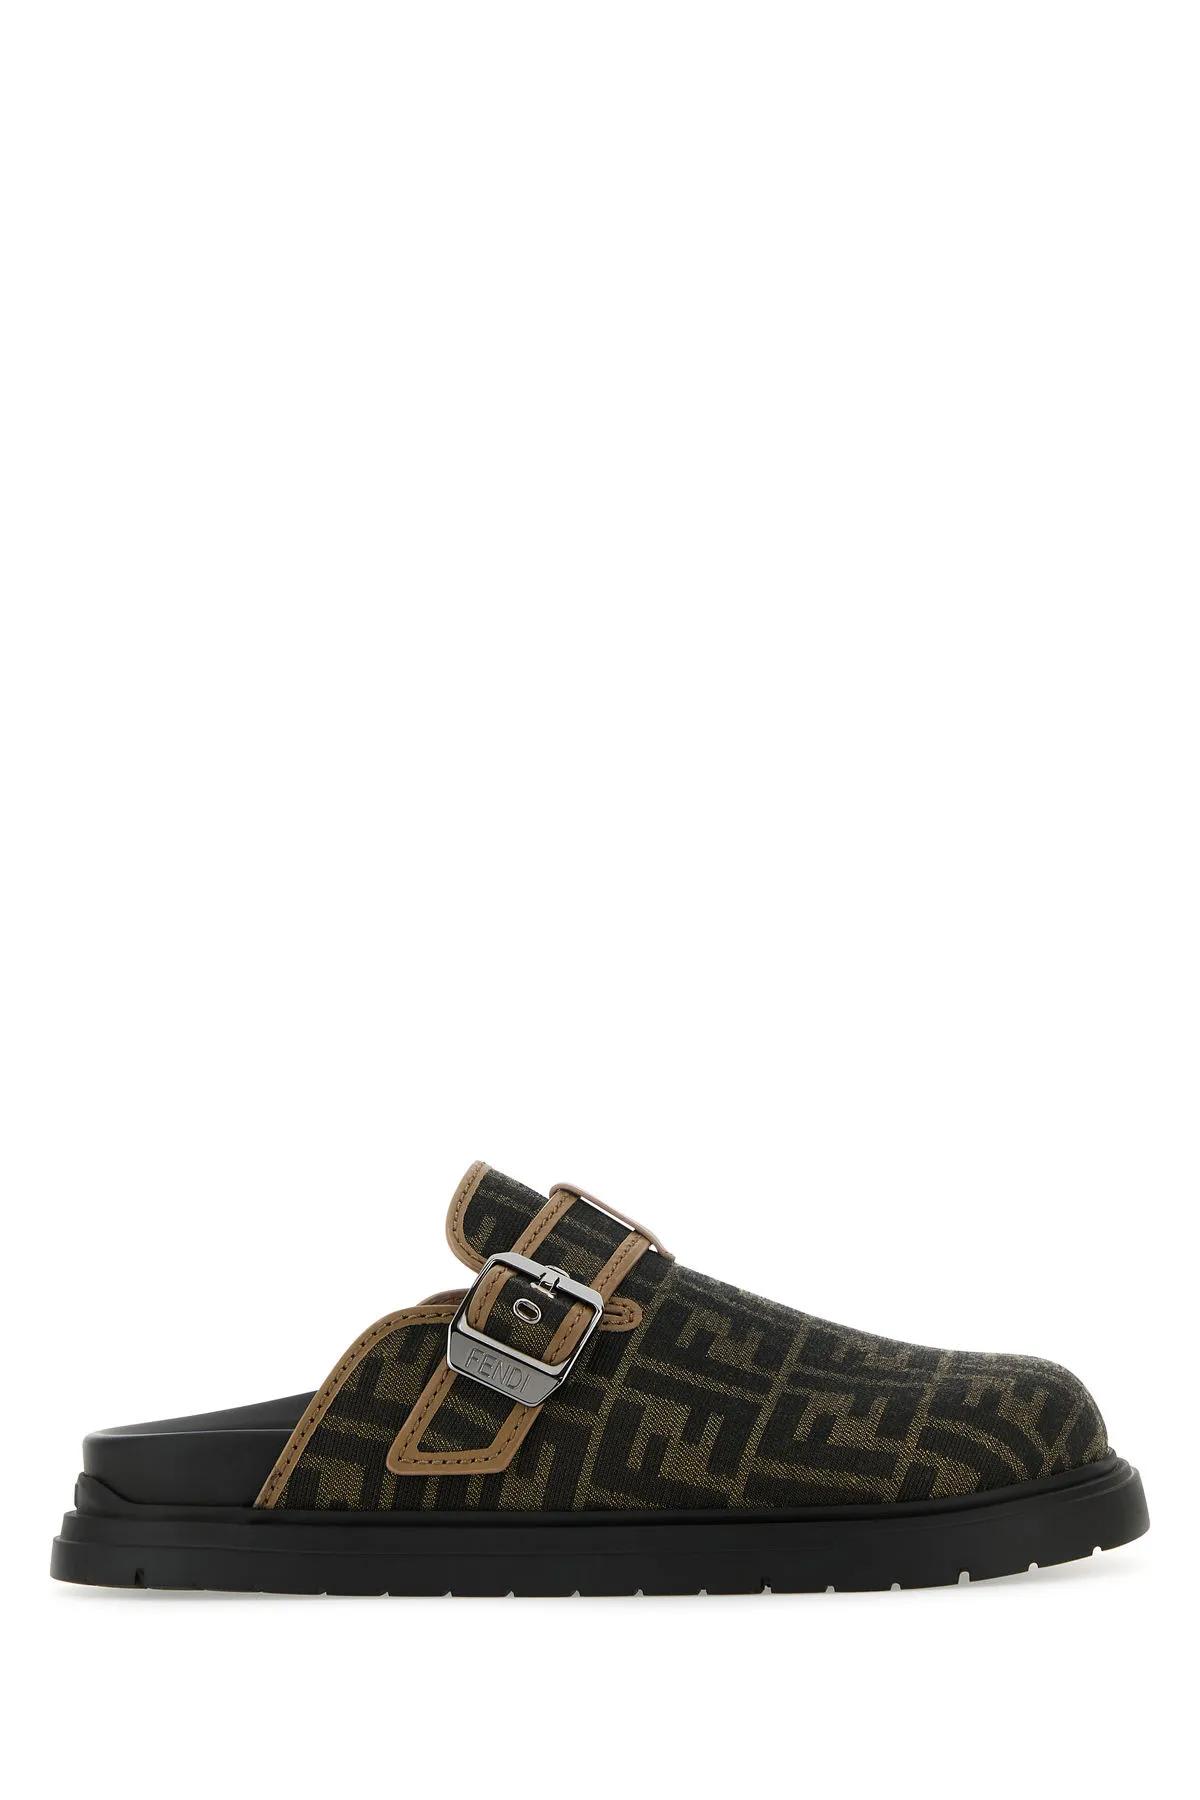 Fendi Embroidered Fabric  Feel Slippers In Black